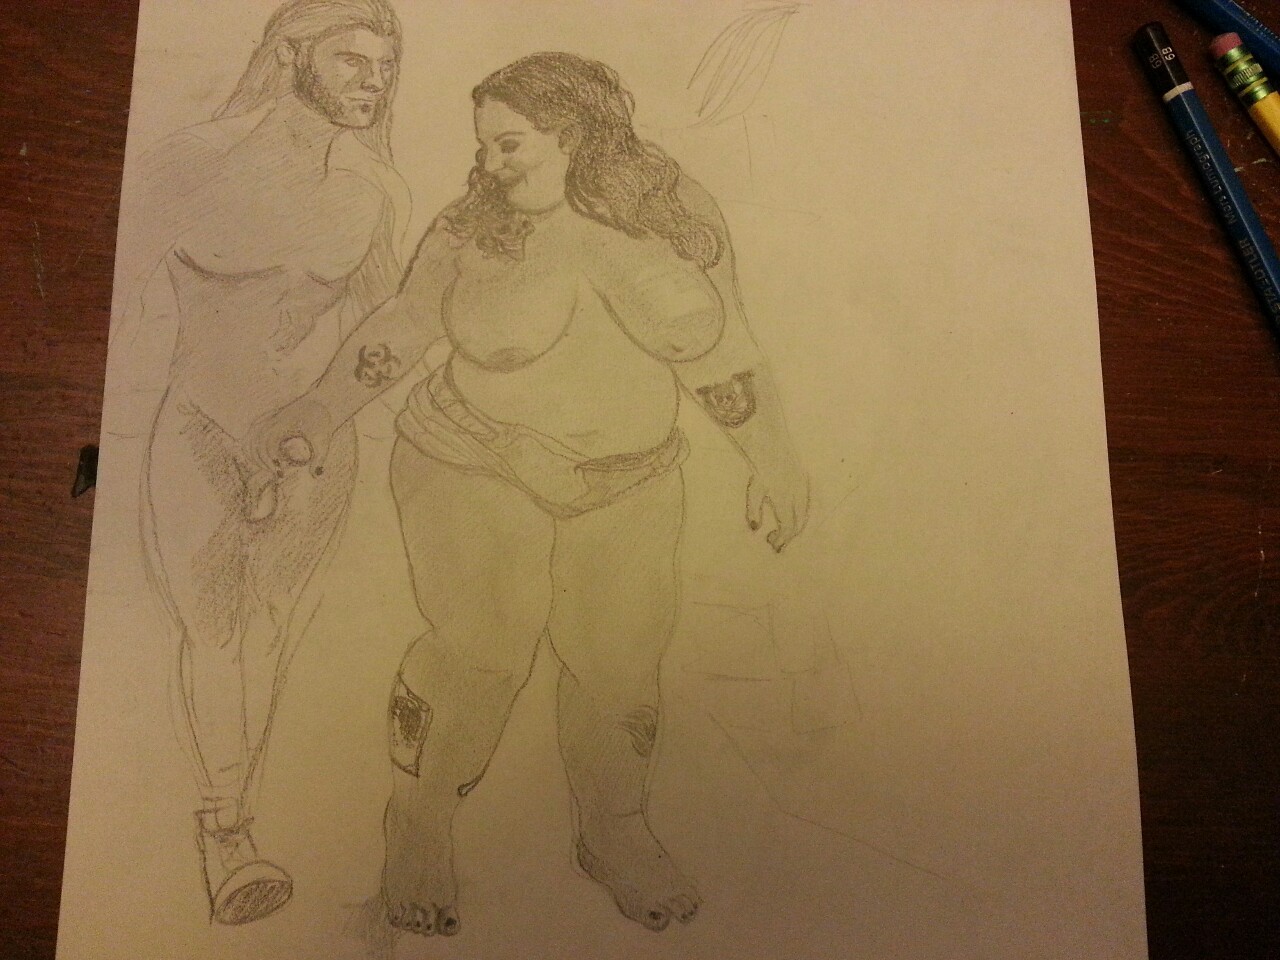 Another sketch I did of bbwgloryfoxxx . Drew my face the dude for some wishful thinking